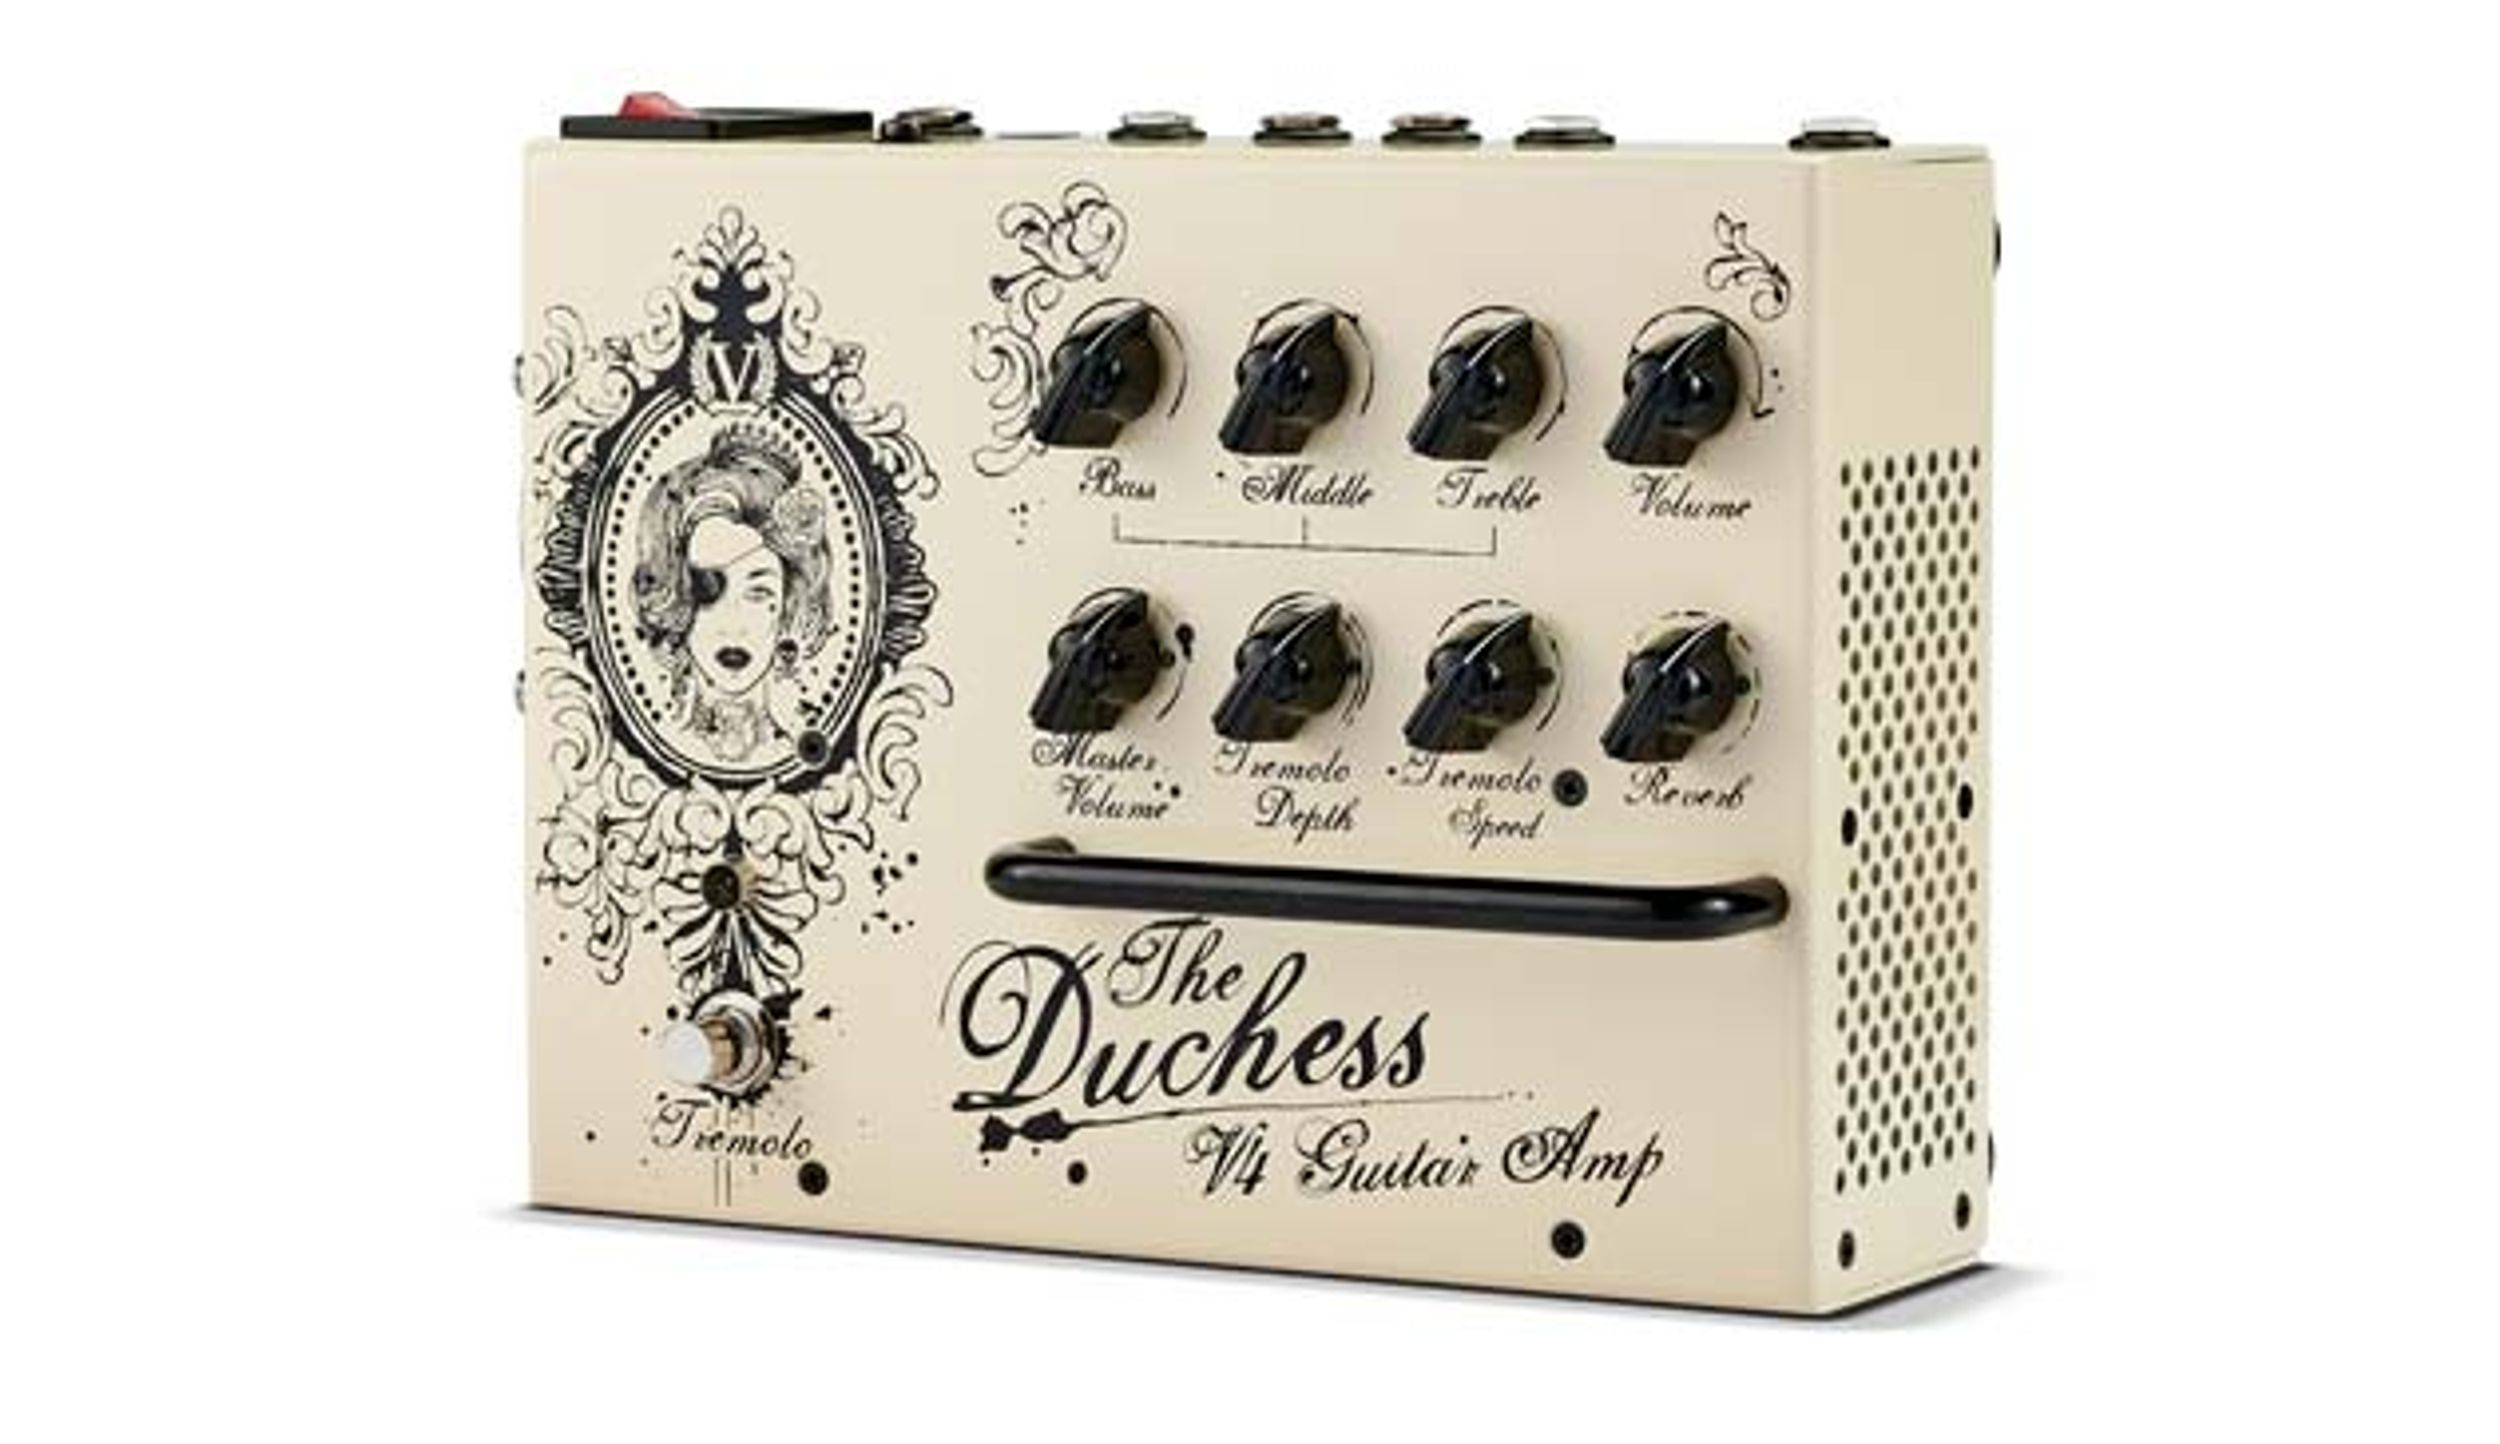 Victory Amps Releases the Duchess V4